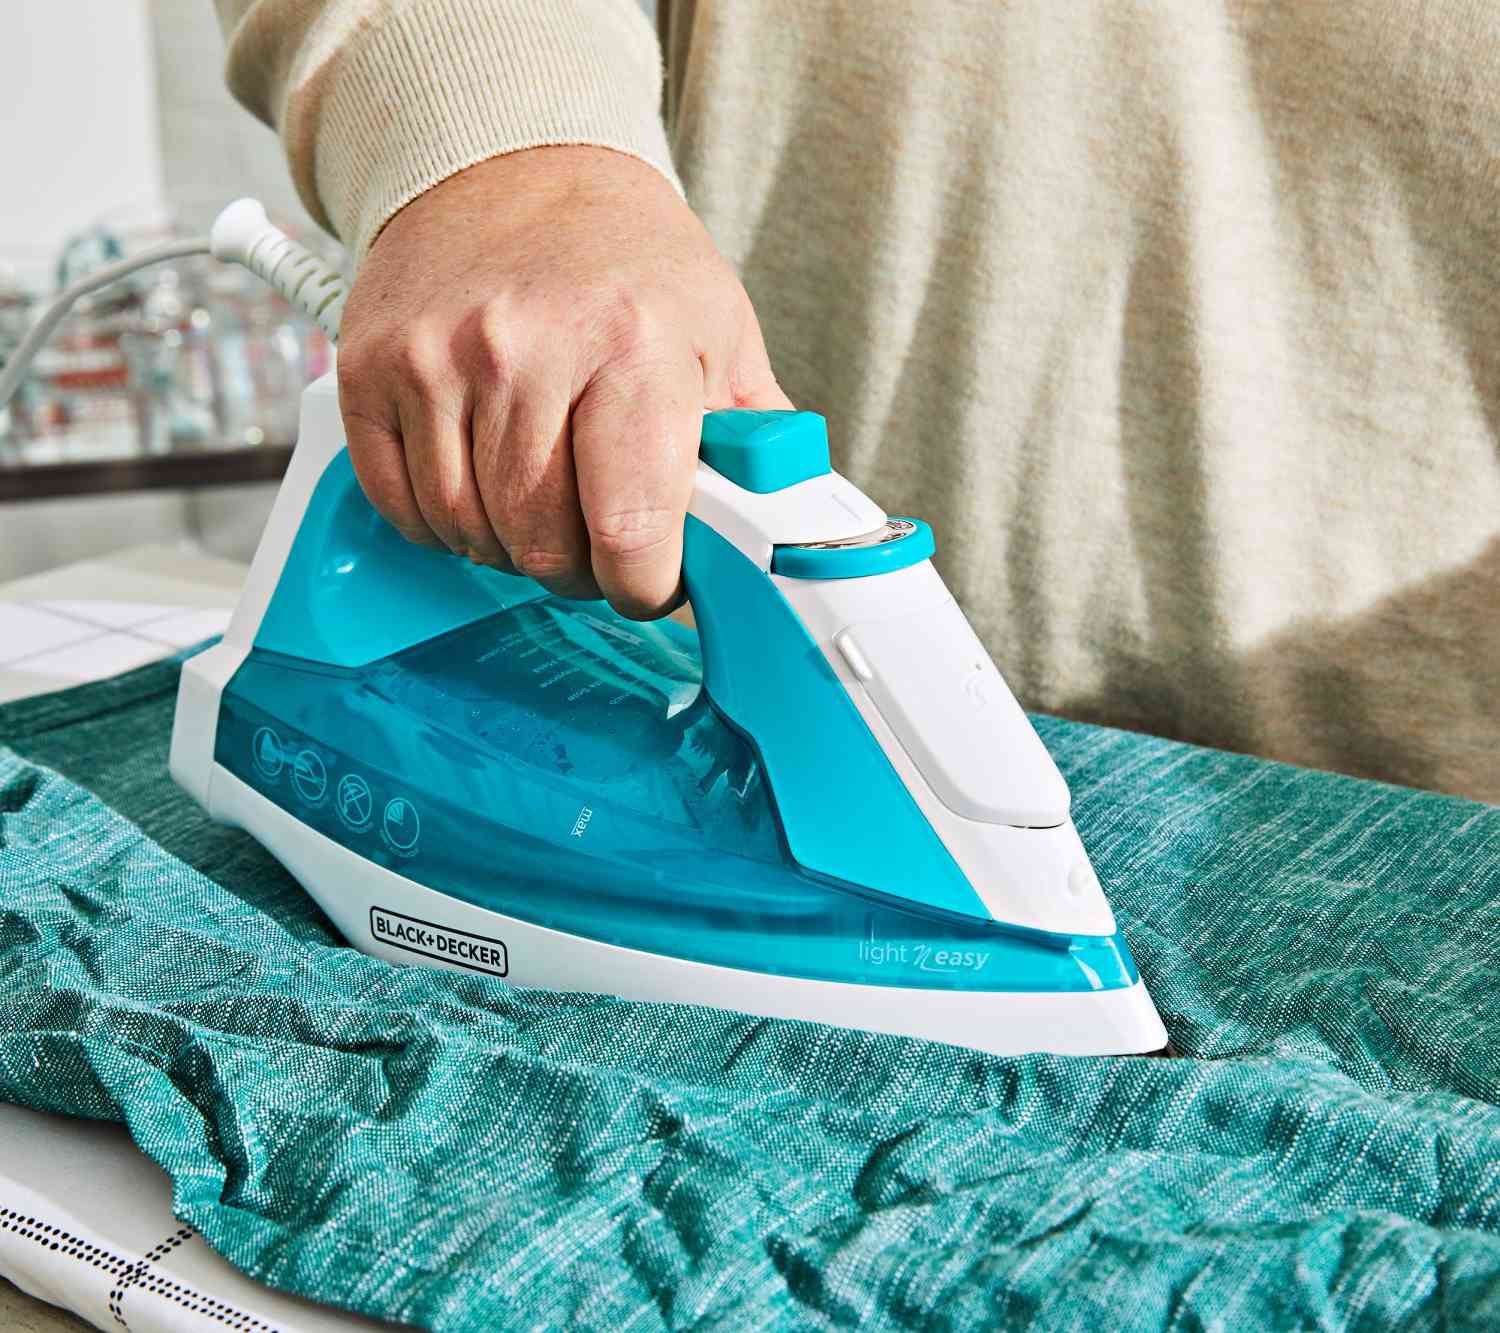 Dual Functionality: Iron and Steam with Ease Using the Black+Decker IR1010 Light 'N Easy Compact Steam Iron